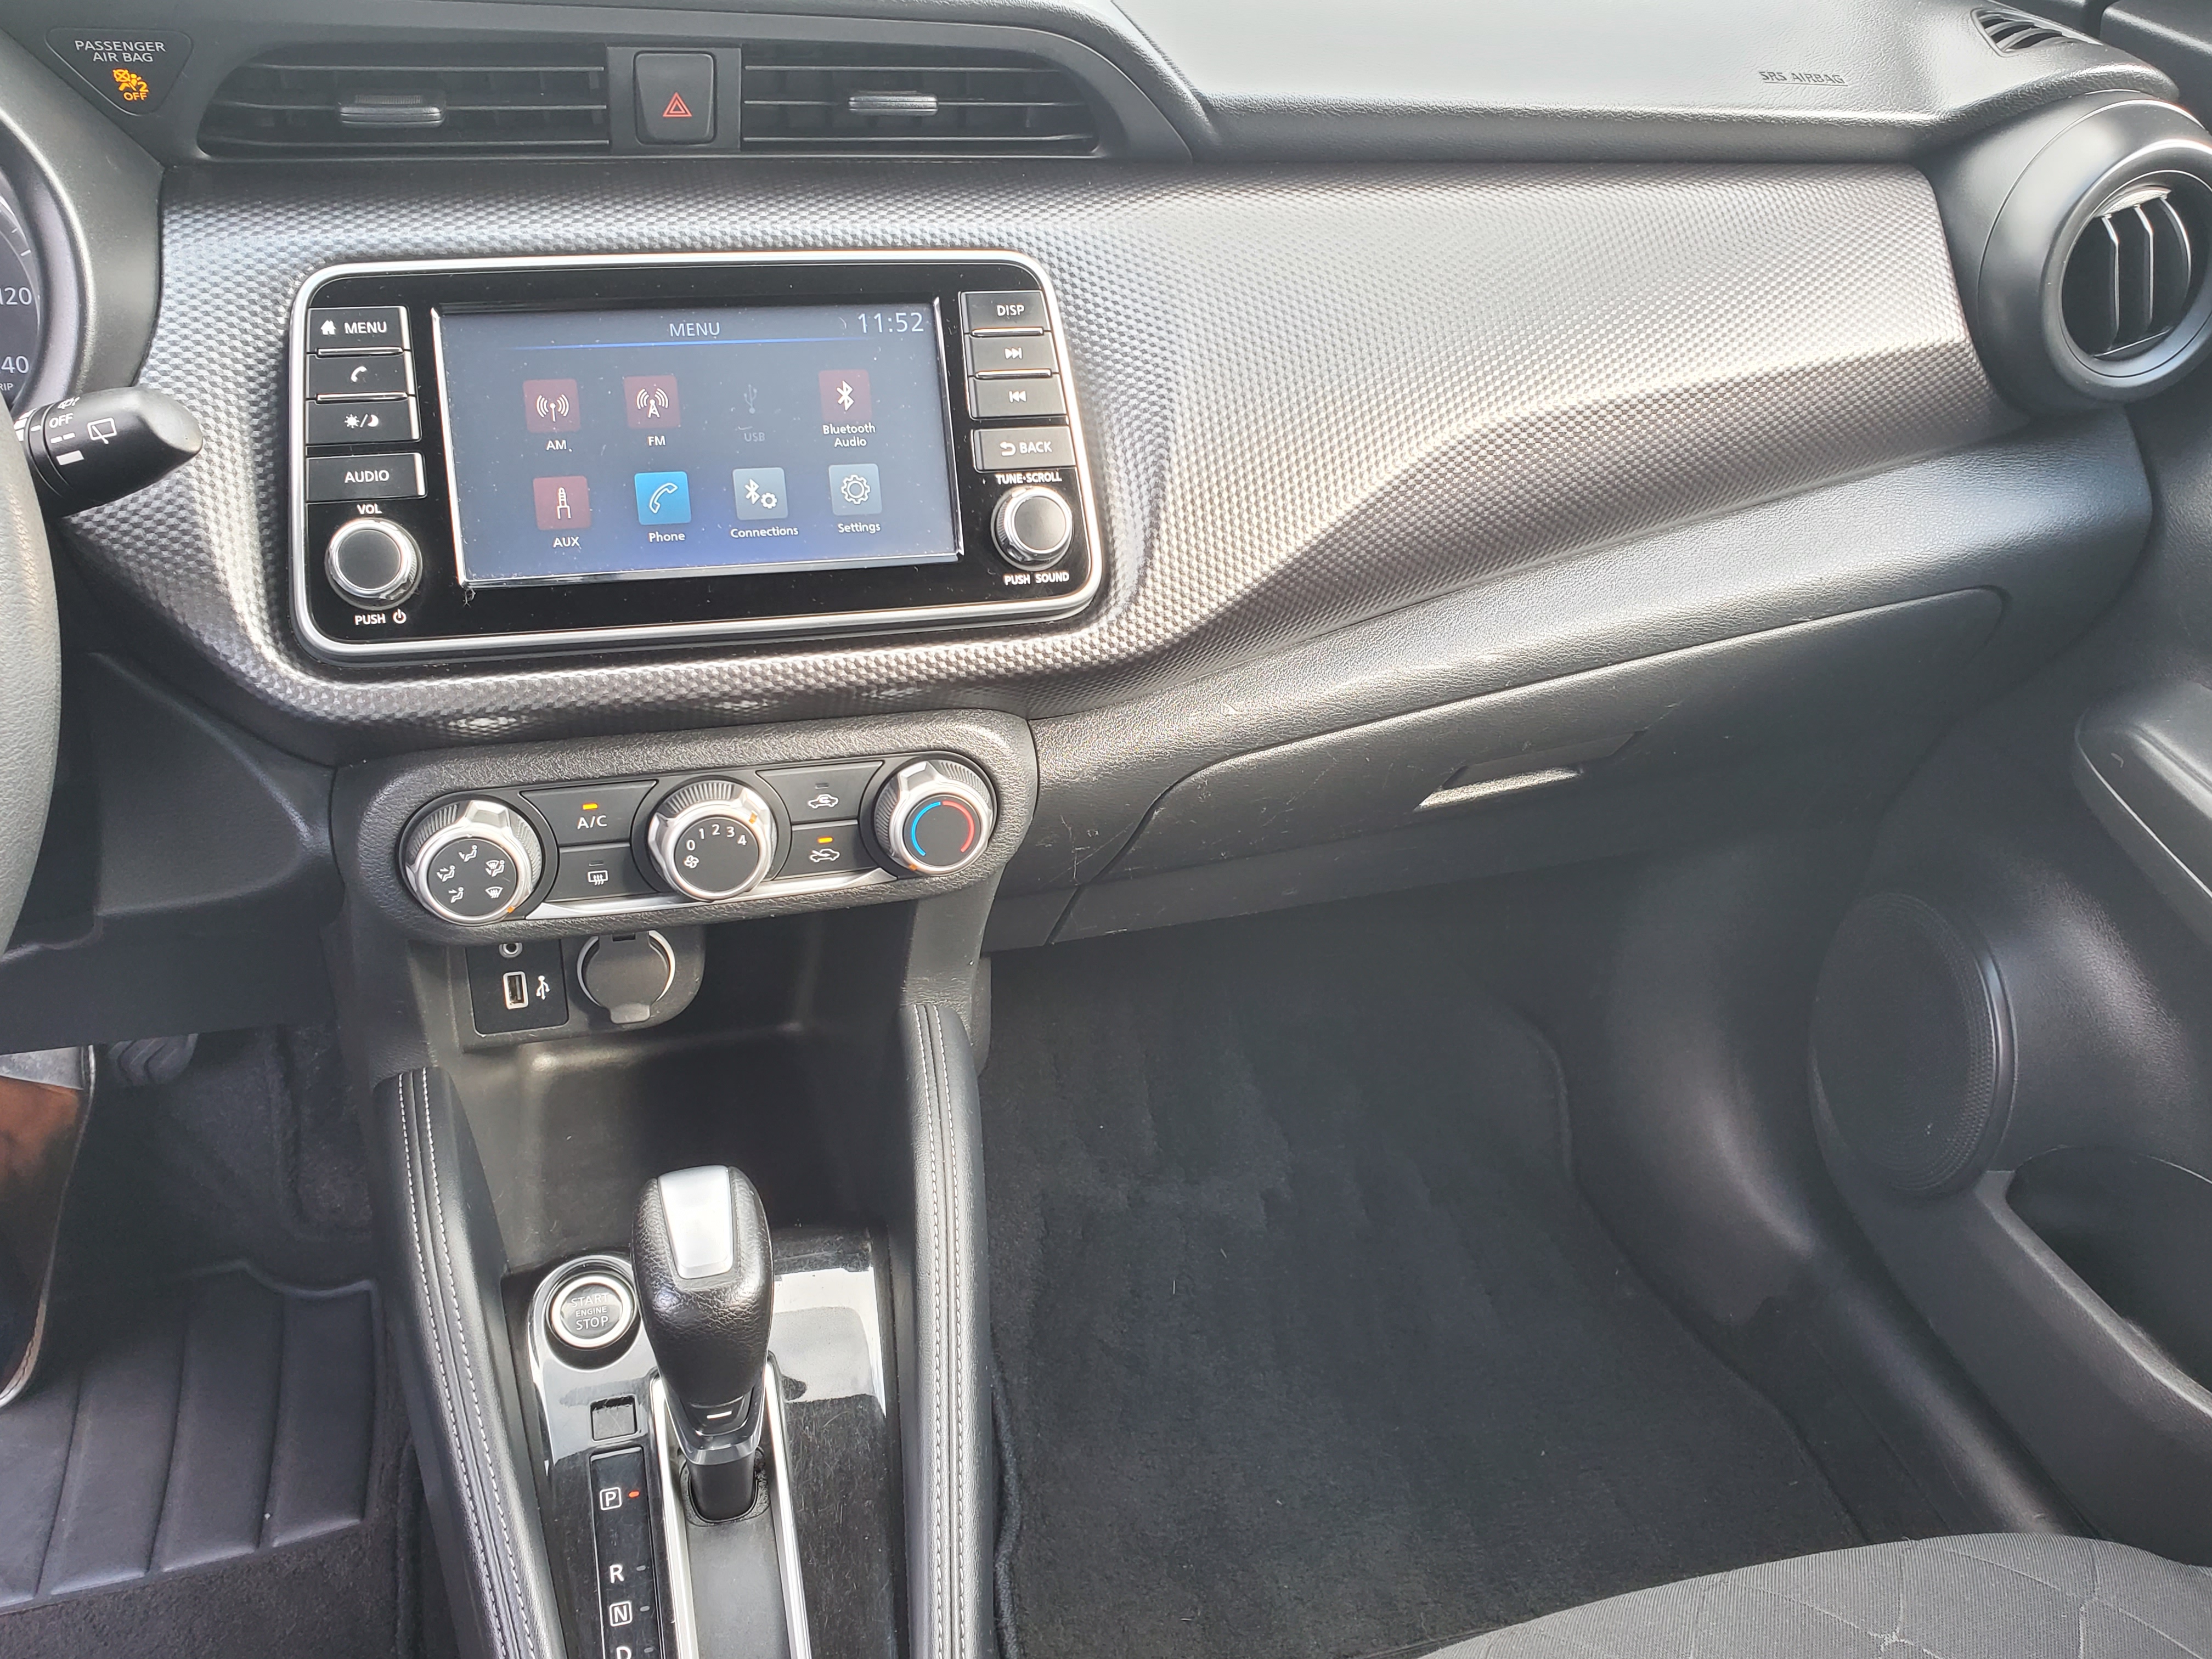 Nissan Console 2